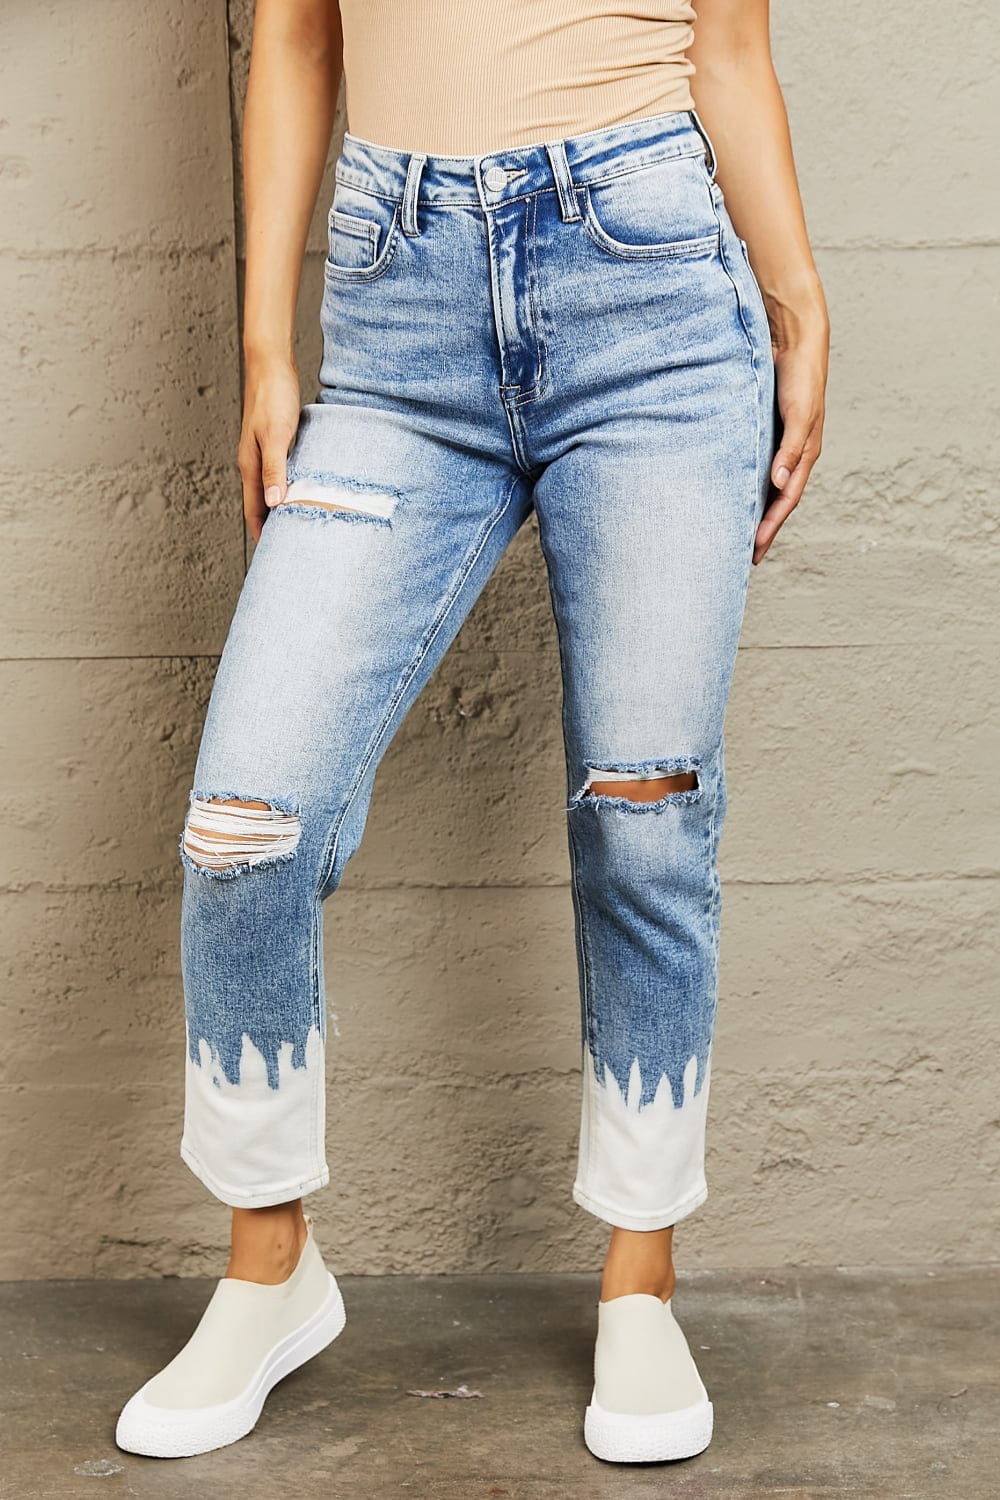 Unique Kulture BAYEAS High Waisted Distressed Painted Cropped Skinny Jeans - Fashion-forward medium wash jeans with high waist design for a flattering fit. Edgy distressed detailing and unique white paint bottom detail. Perfect blend of comfort and style. Shop now on Unique Kulture.